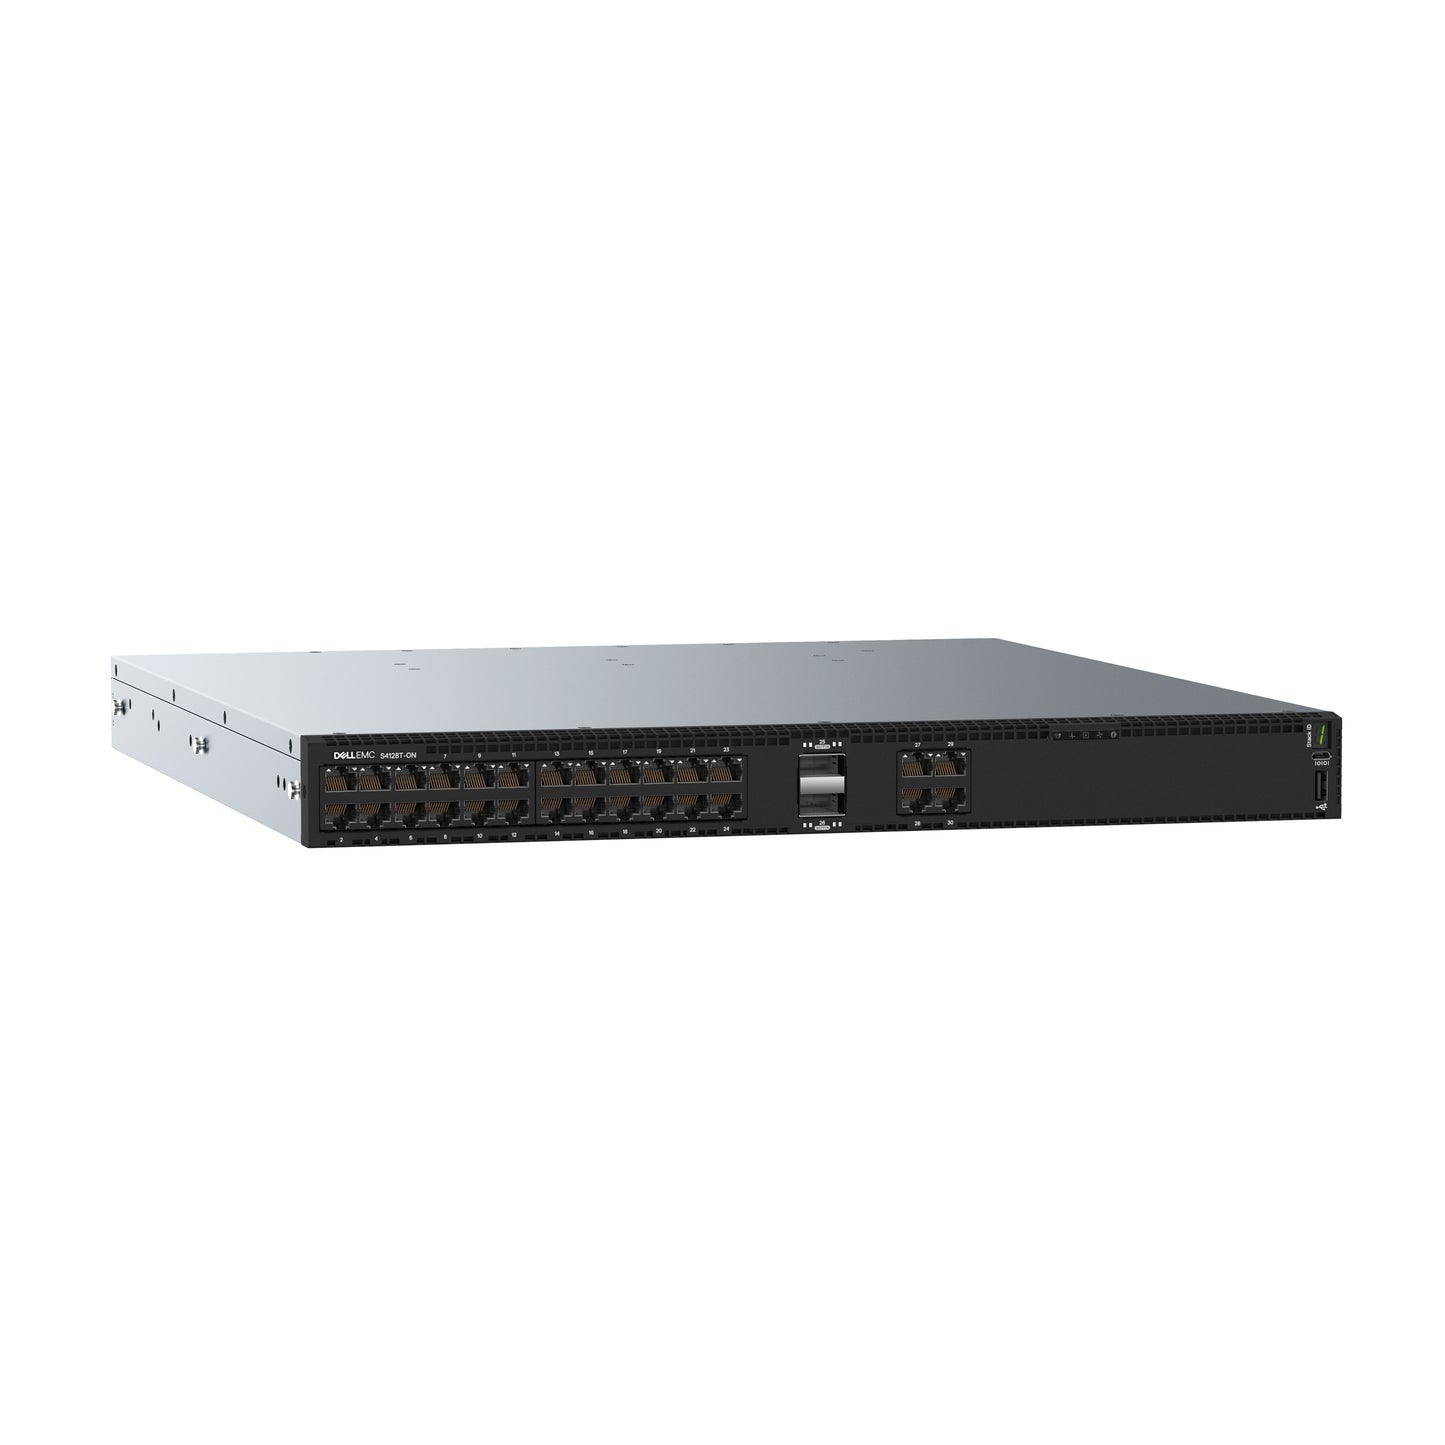 DELL NETWORKING DELL EMC SWITCH S4128T-ON 1U PERP 28 X 10GBASE-T 2 X QSFP28IO TO PSU DELL EMC SWITCH S4128T-ON 1U 28 X 10GBASE-T 2 X QSFP28IO TO PSU